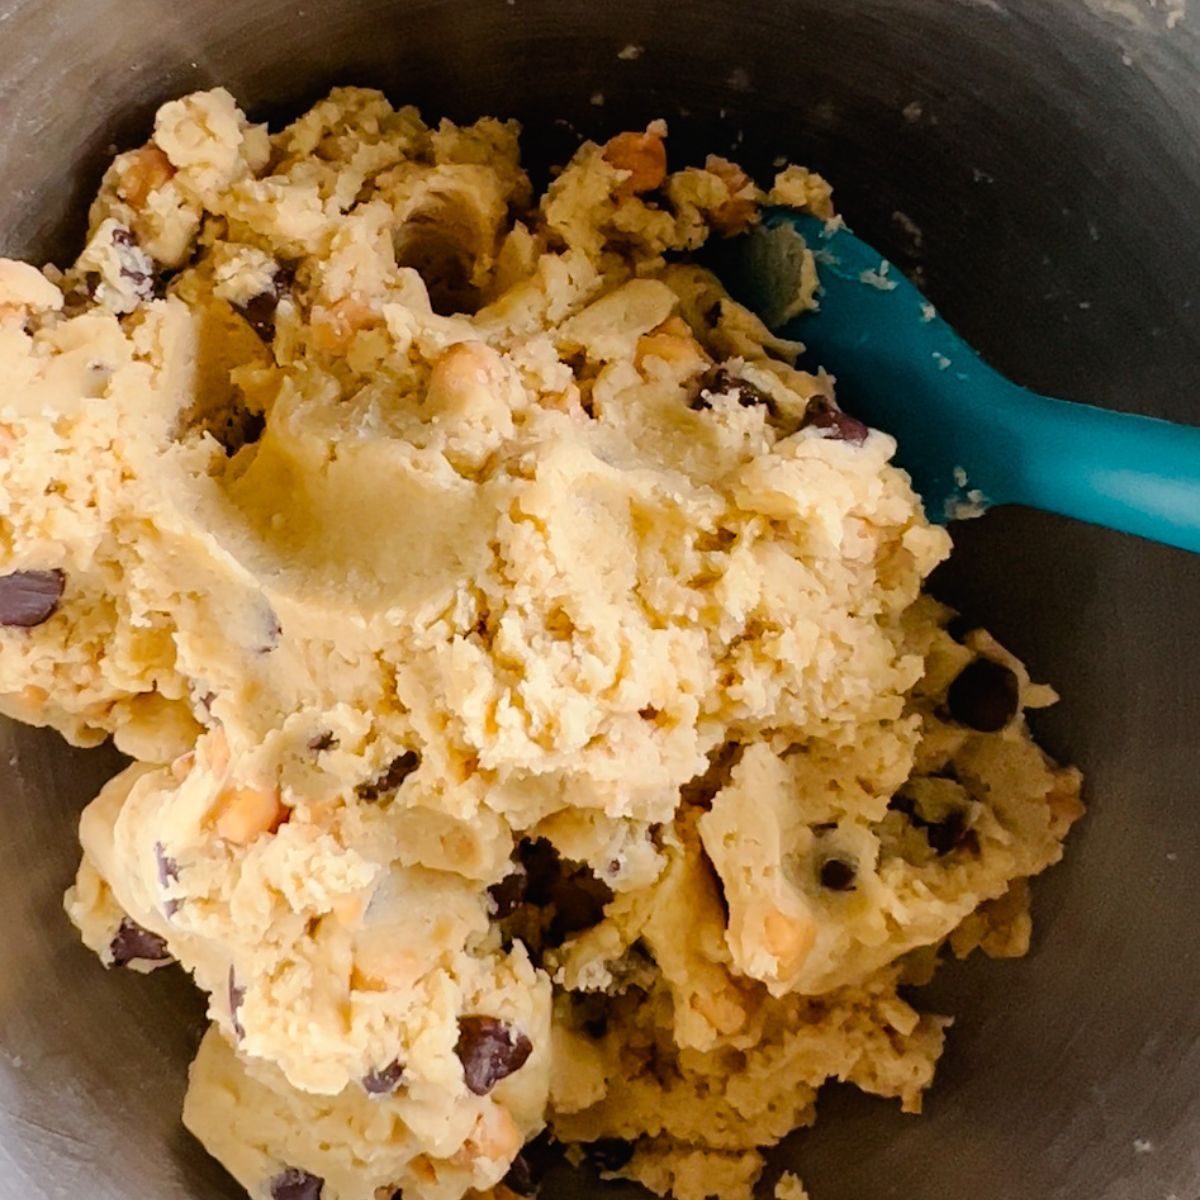 Caramel chocolate chip cookie dough in a mixing bowl mixed together.